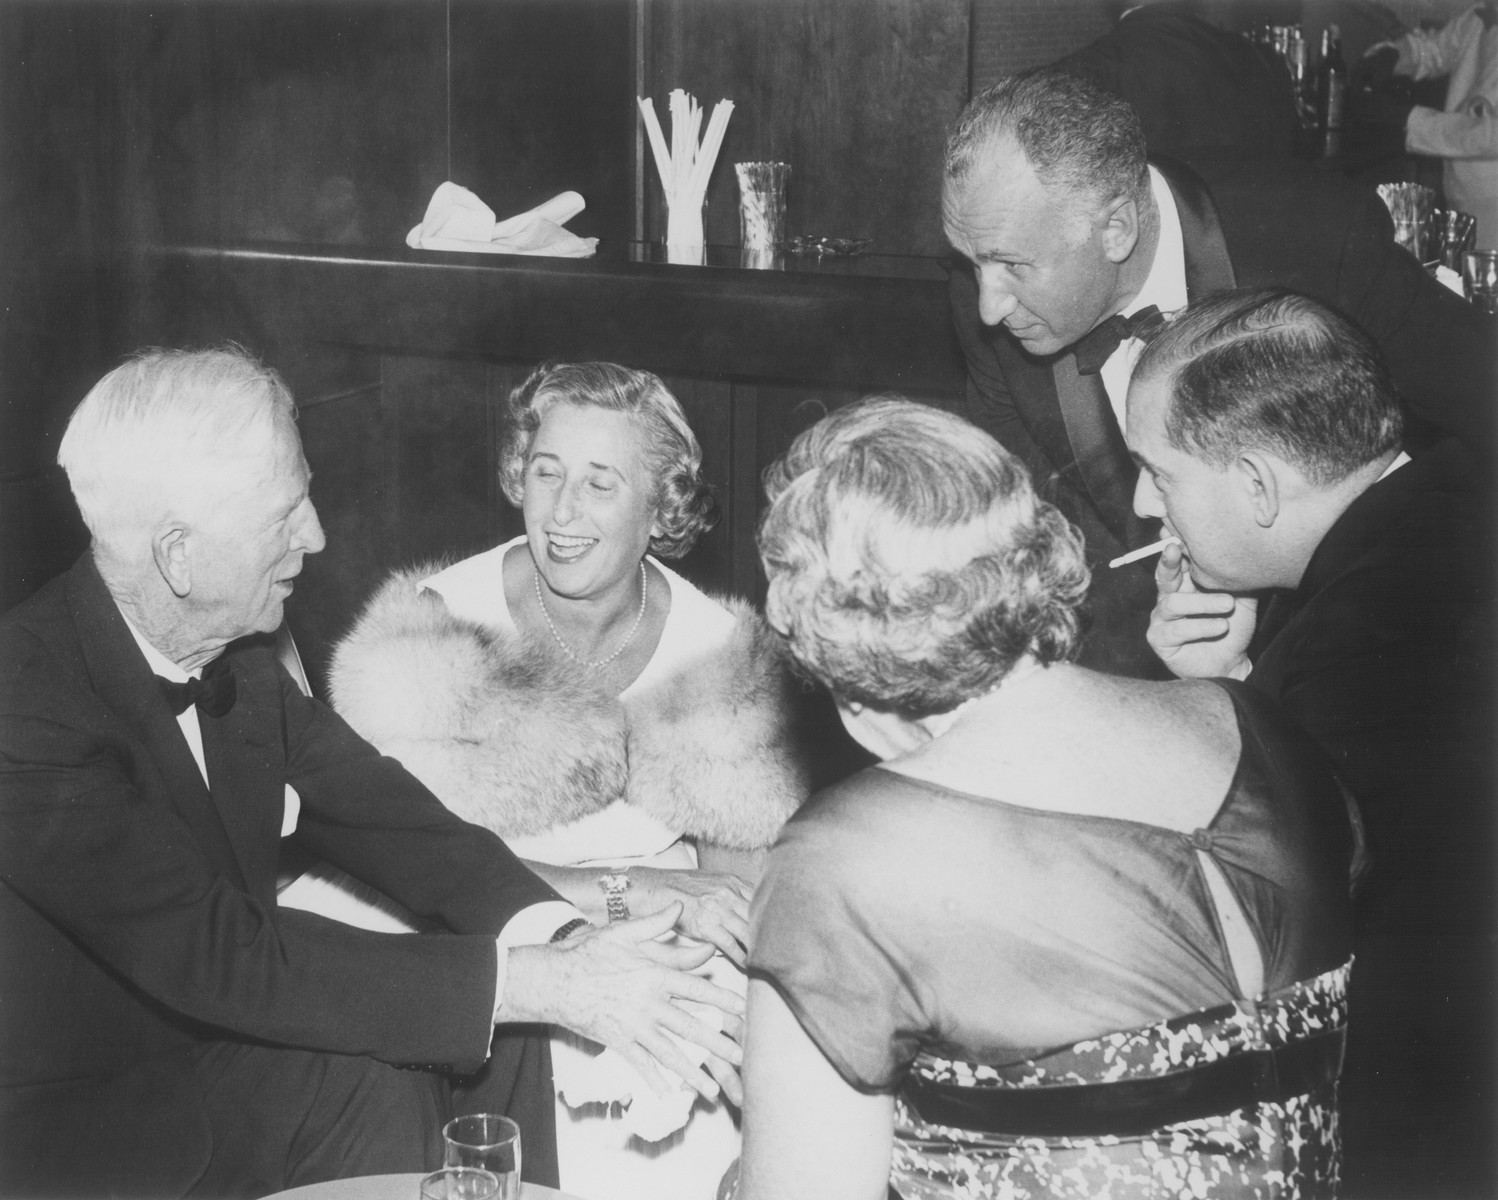 American Jewish philanthropist Abraham S. Kay speaks to James G. McDonald and others at an affair in Washington, D.C.

Among those pictured are: James G. McDonald (left), Abraham S. Kay (top right) and Abraham Harman (far right with cigarette).